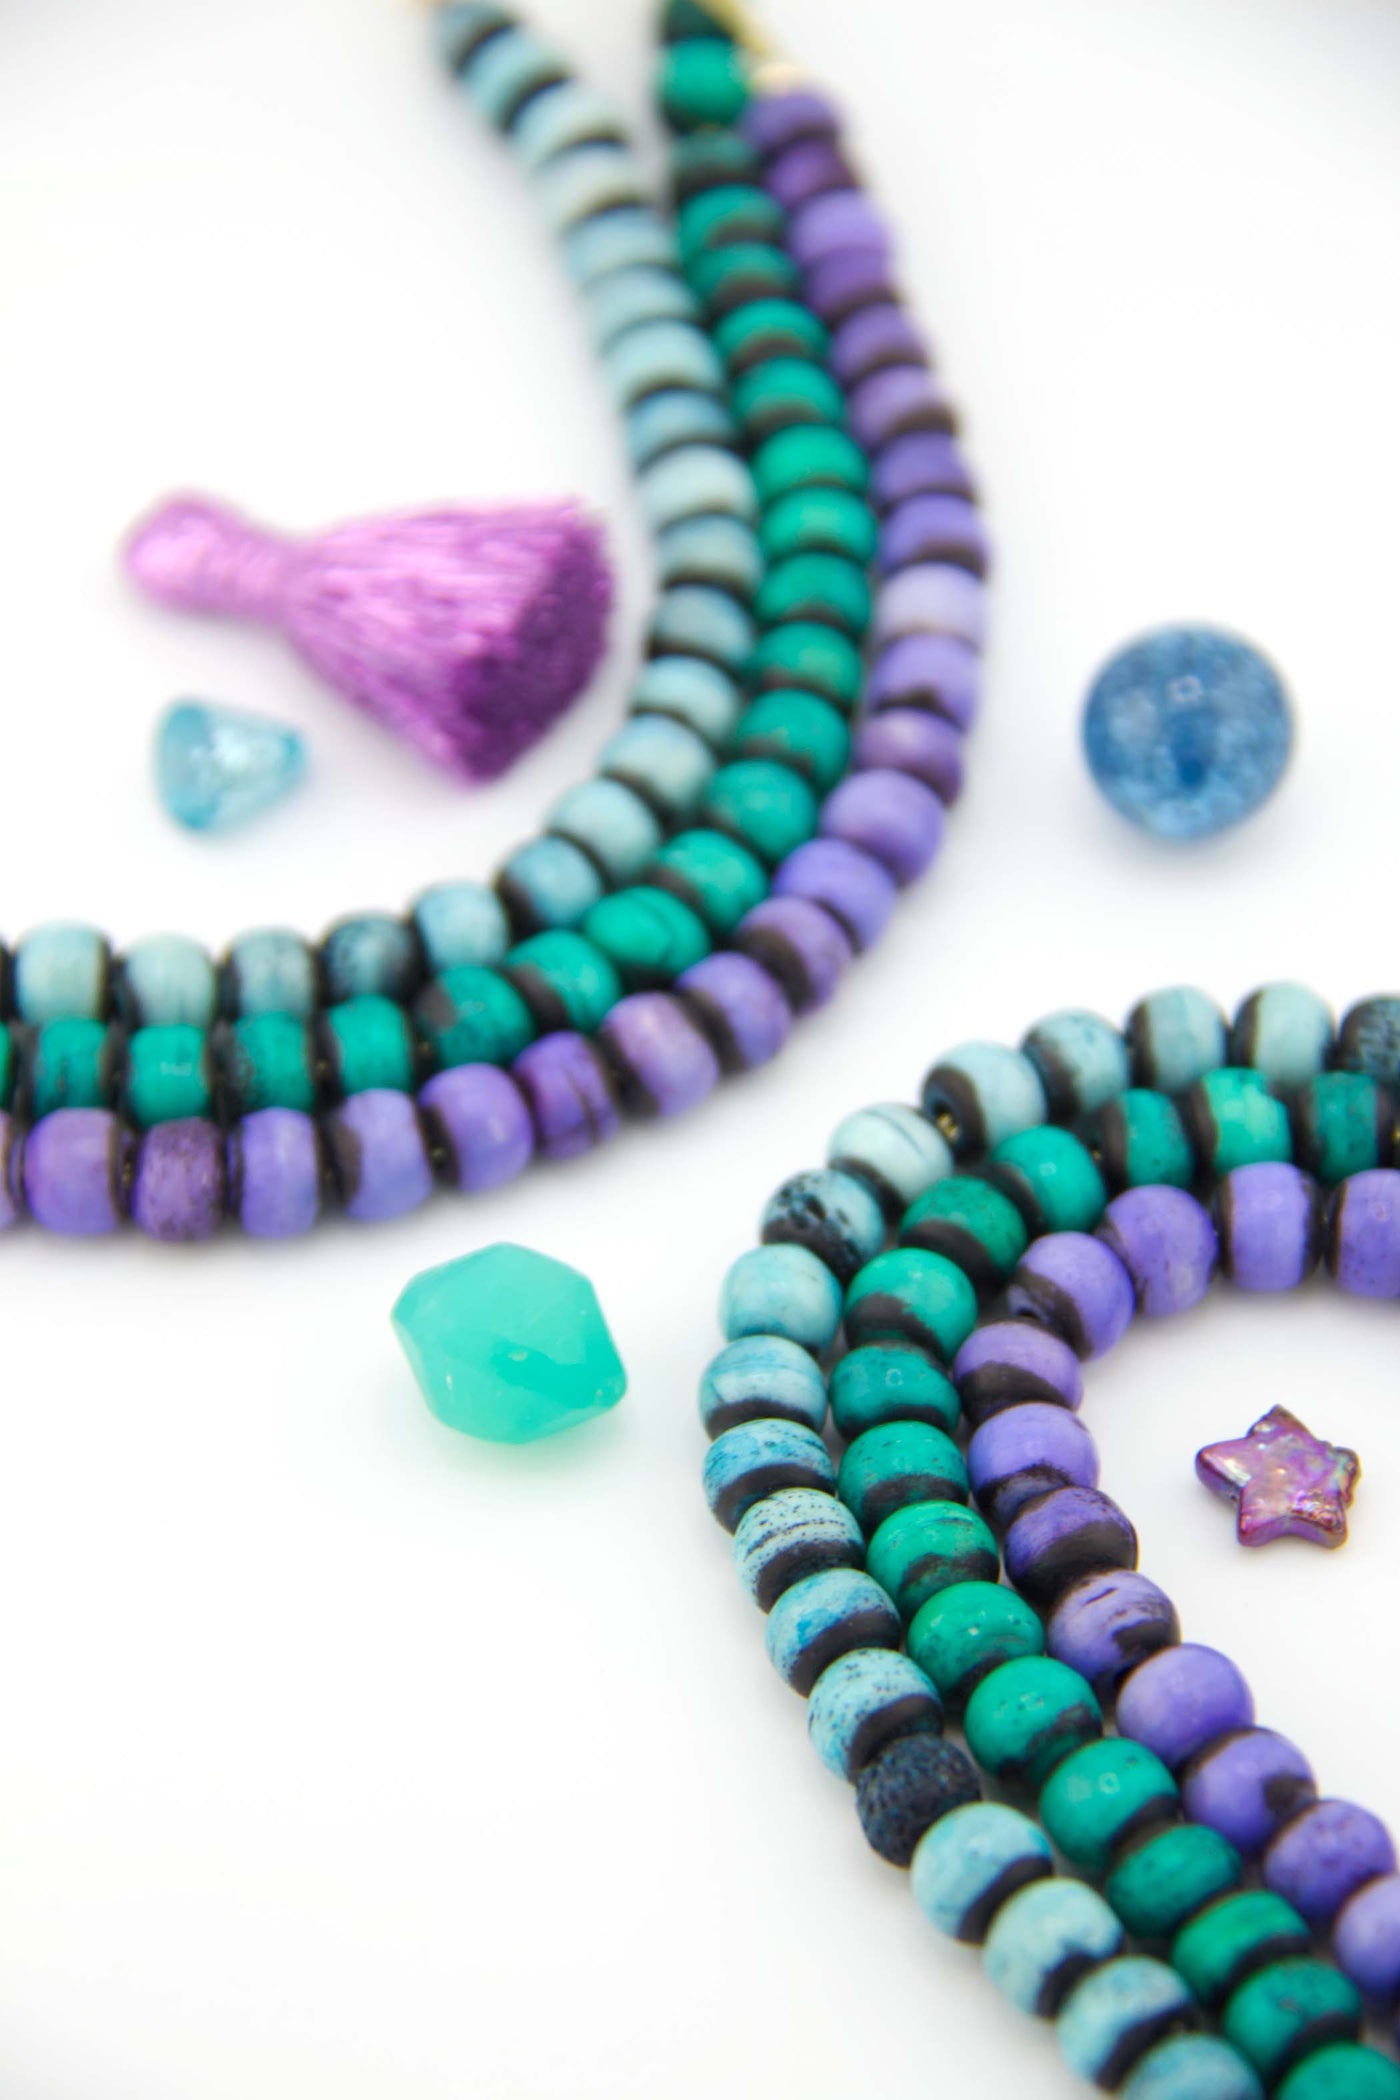 Dive into the ethereal beauty of the night sky with our Aurora Borealis Inspired Beads